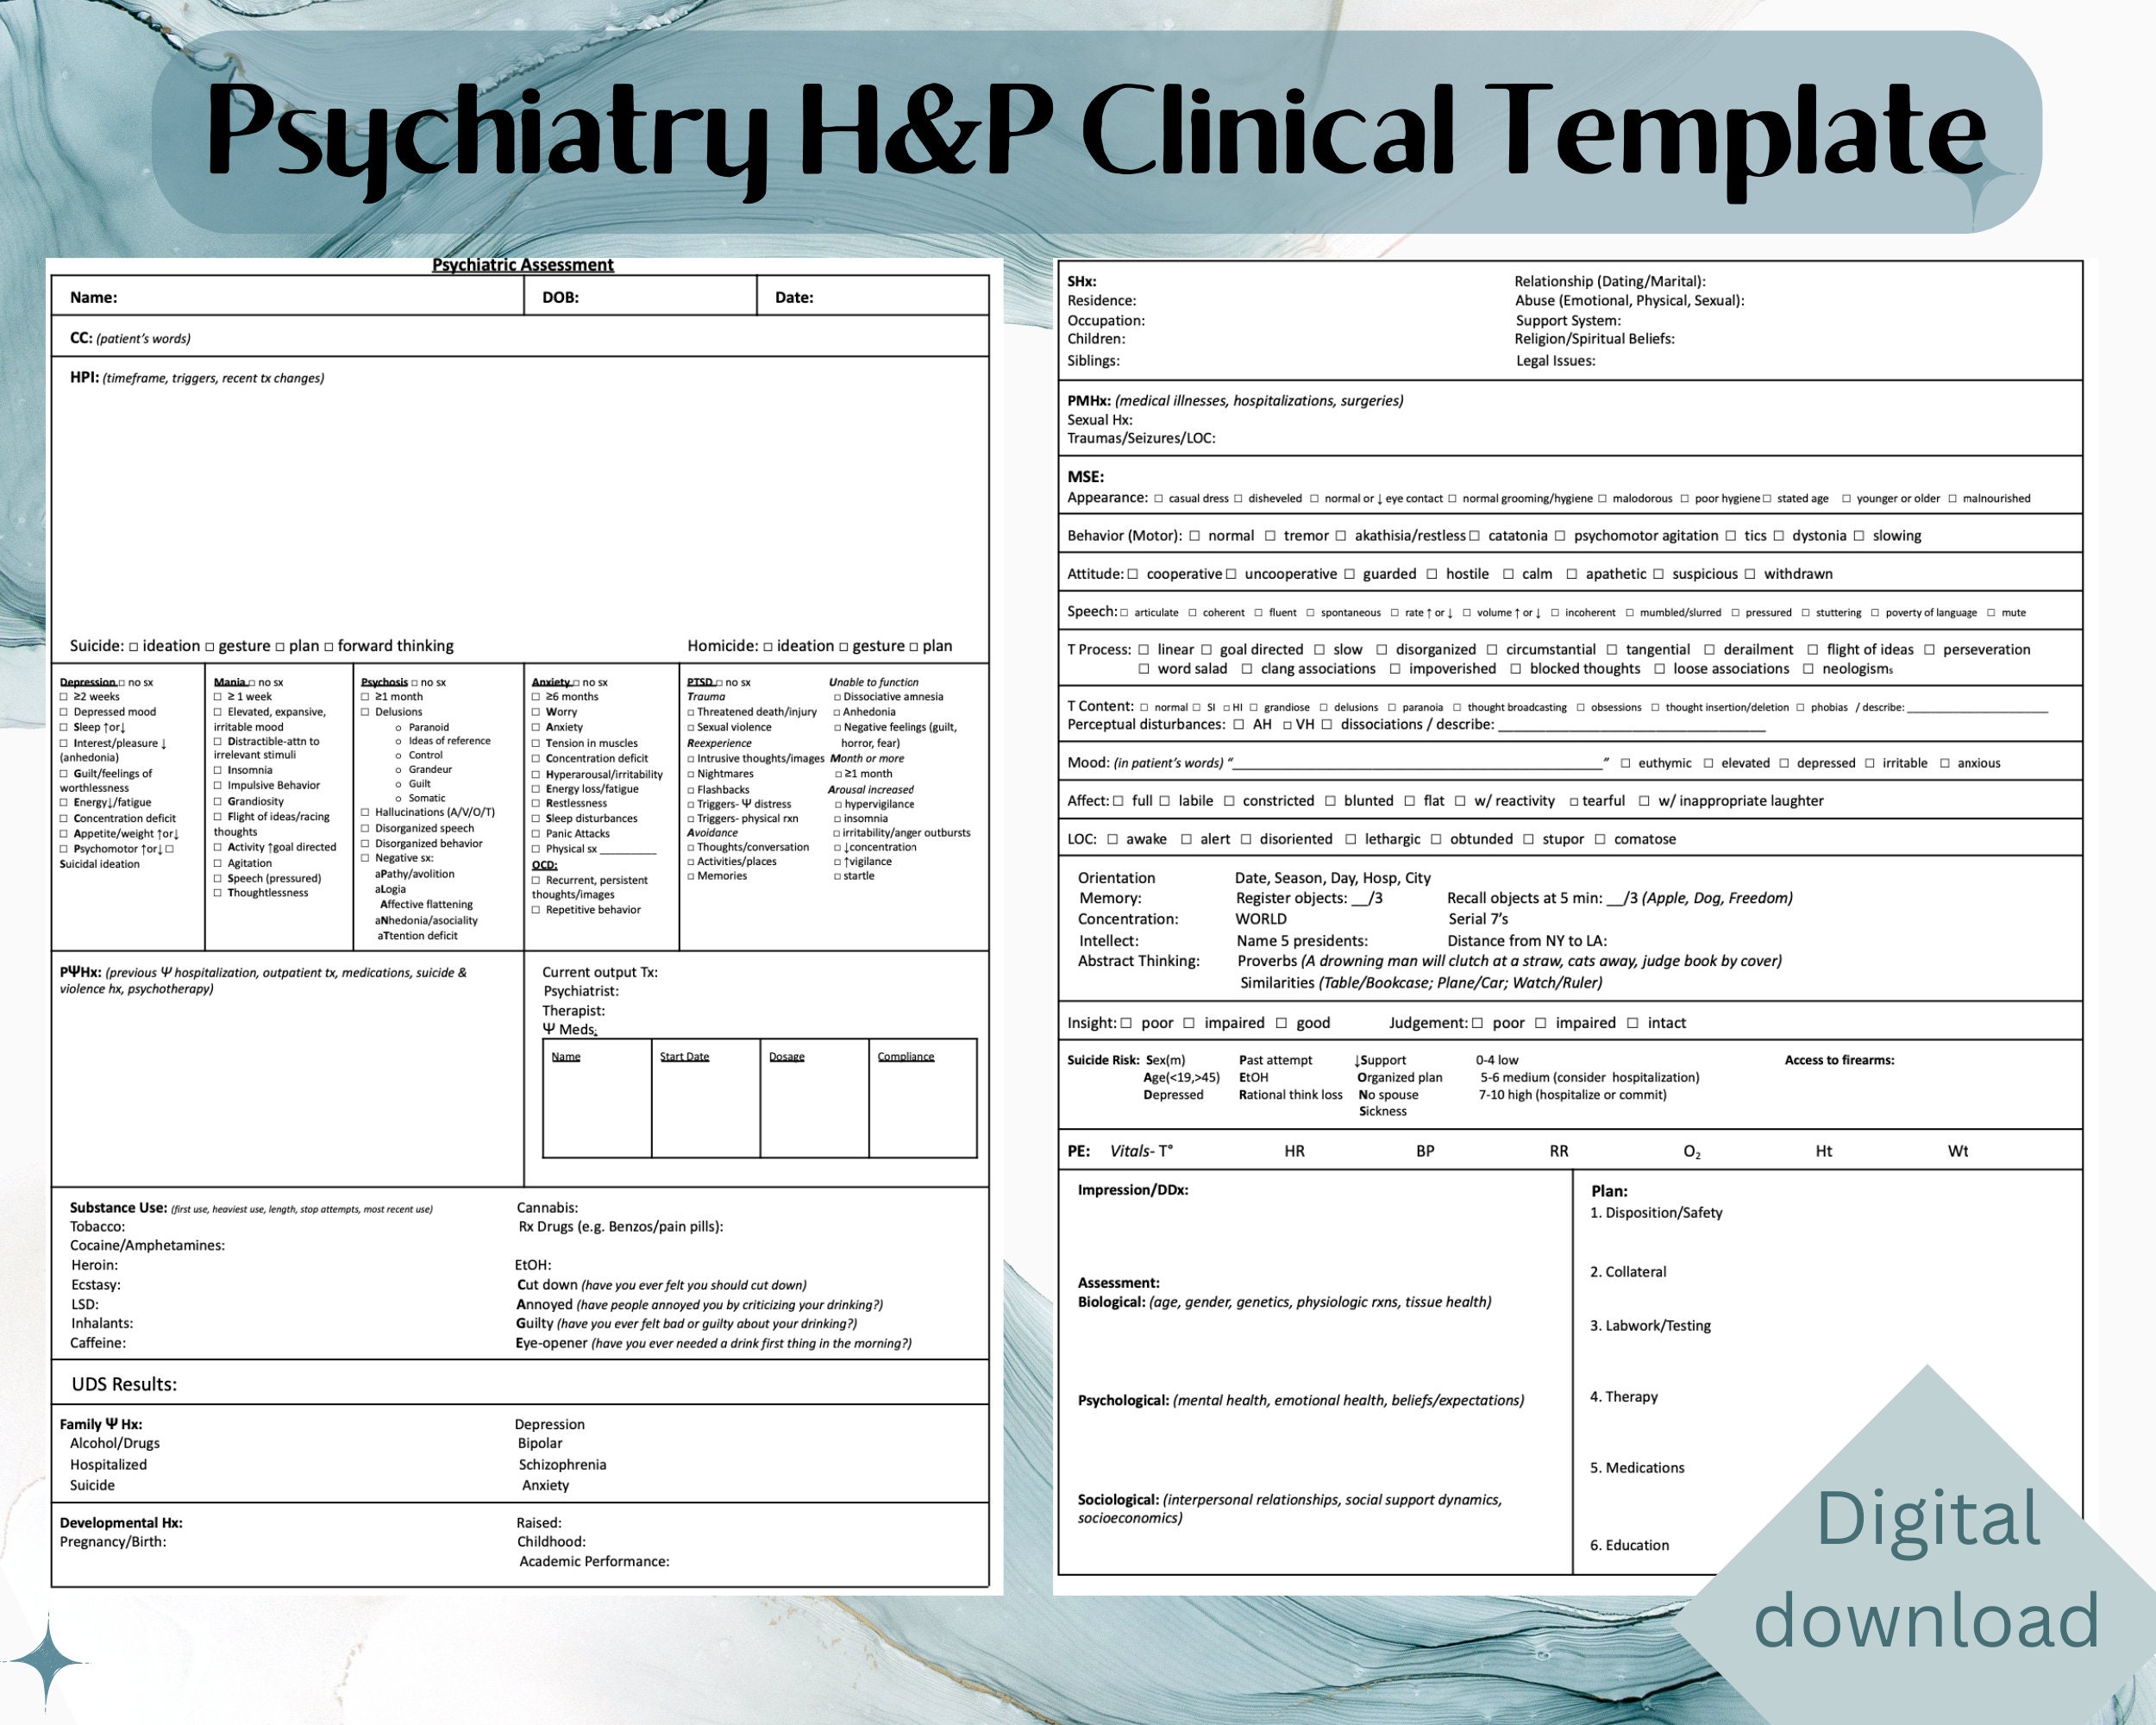 psychiatry-h-p-clinical-template-for-medical-students-and-etsy-norway